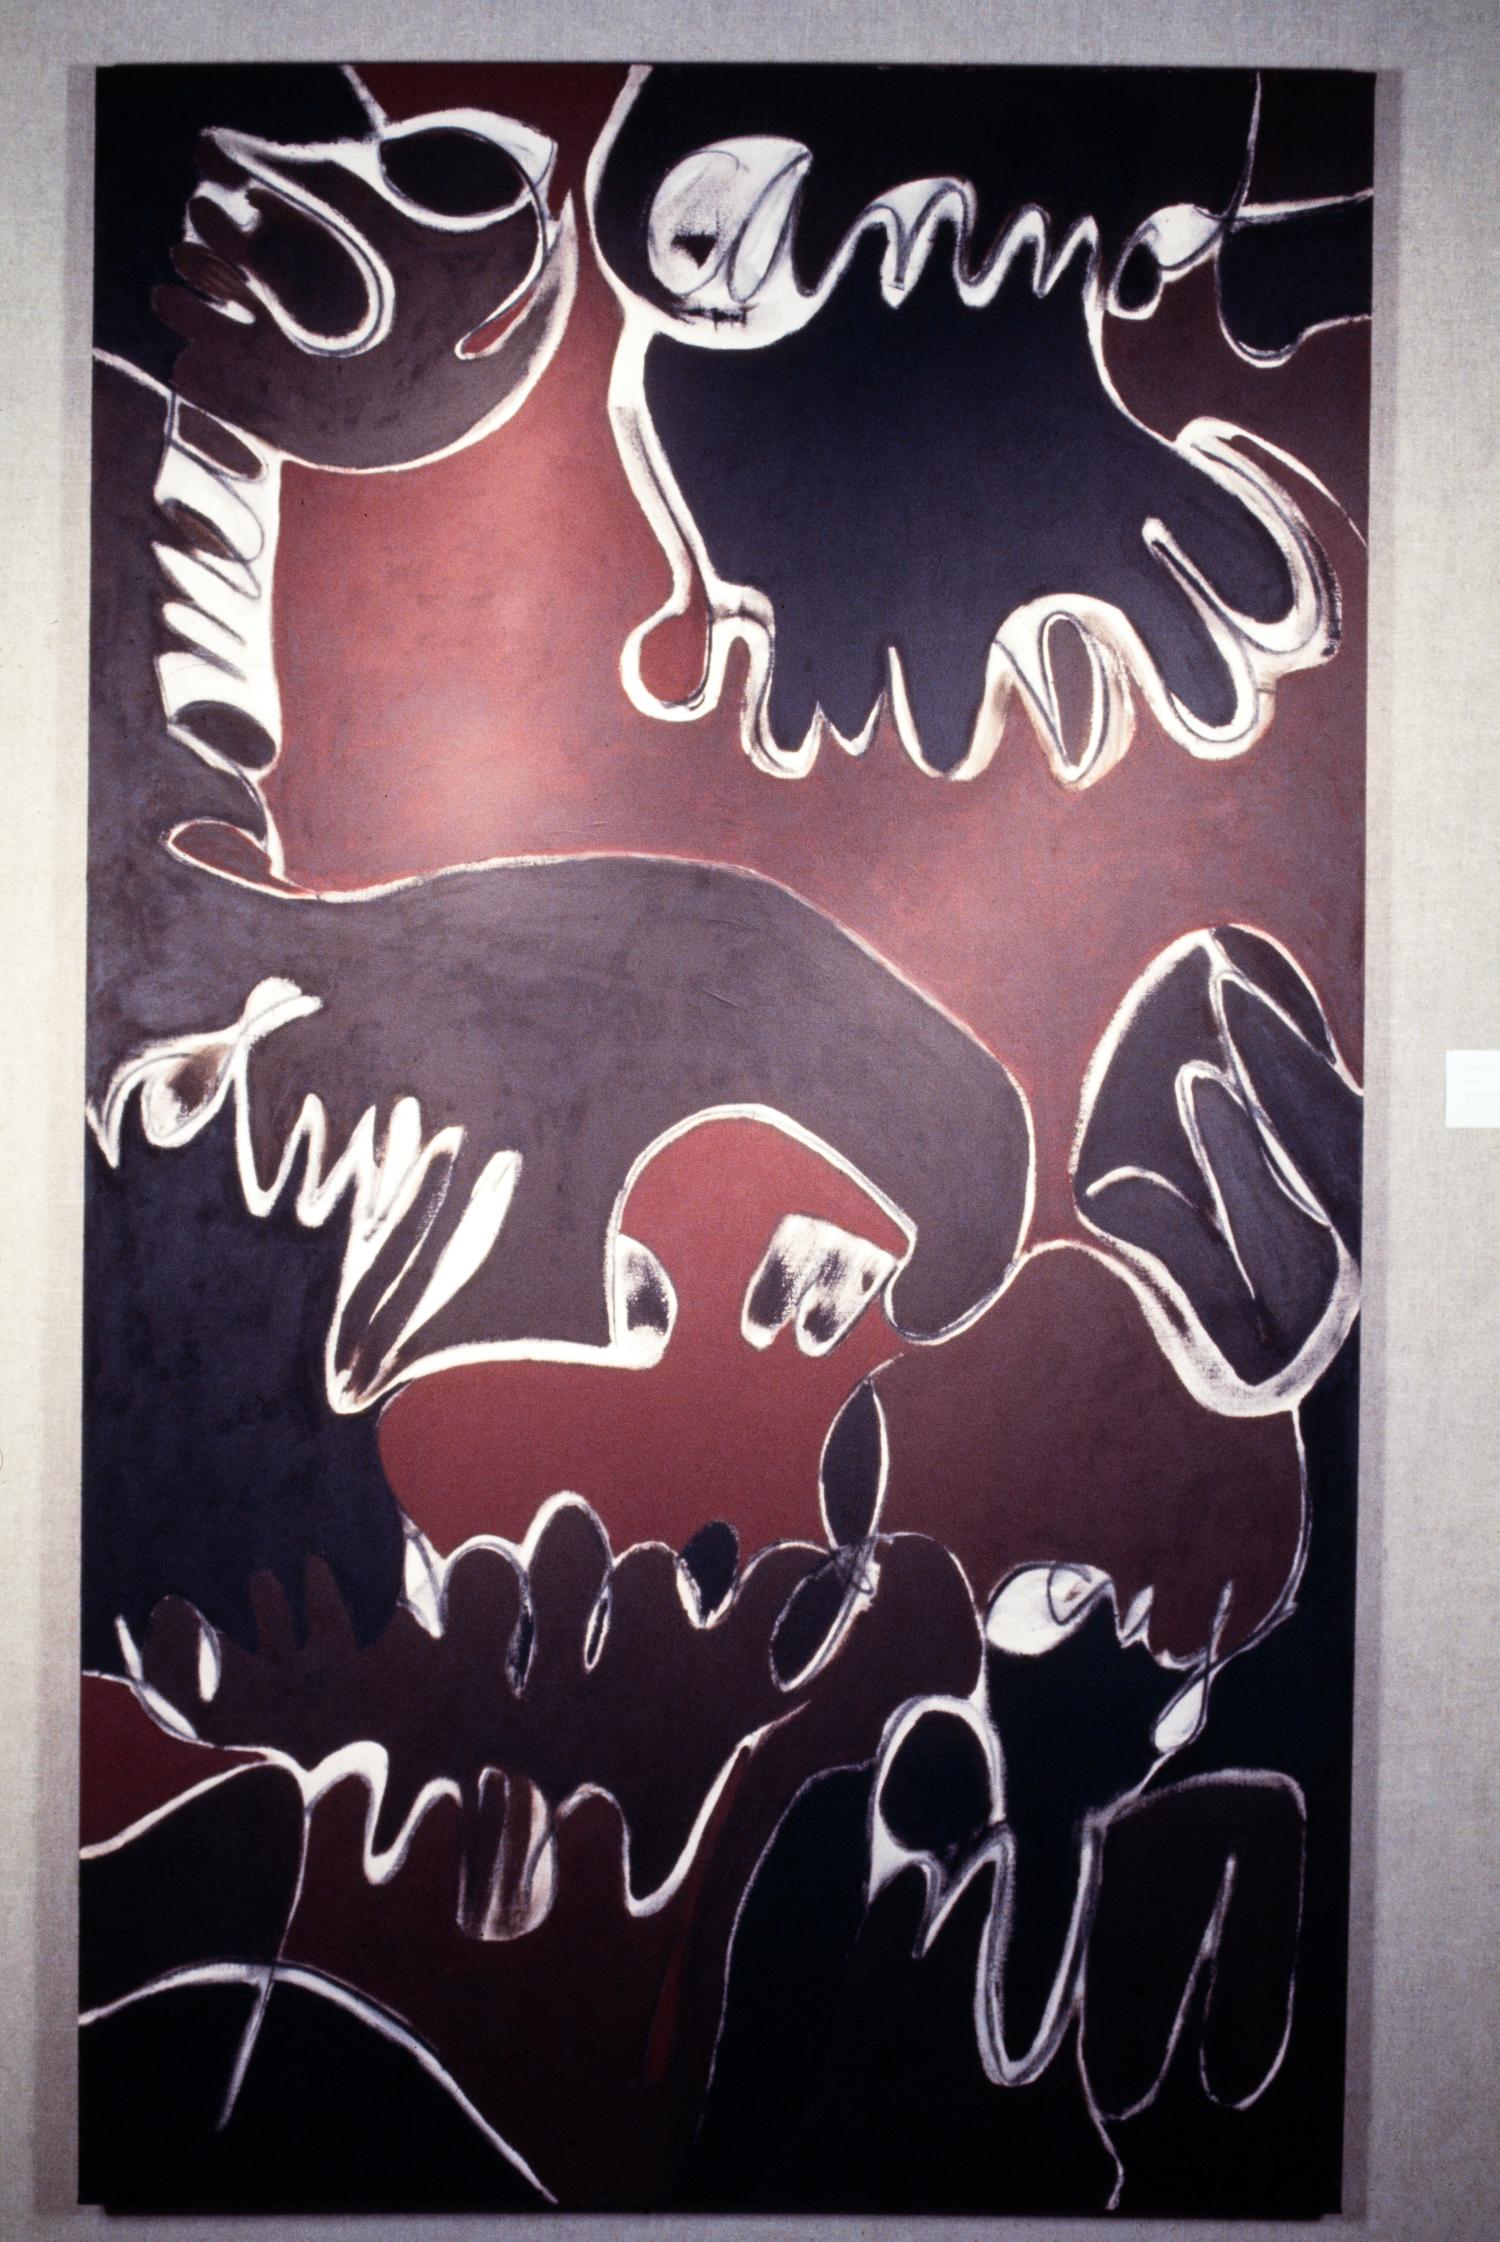 photograph of painting. the canvas has abstract shapes created by large loops of handwriting around the surface. the handwriting is outlined with white, while the much of the lower and upper empty sections of the painting are filled with black, and the more centered open areas filled with a reddish brown.